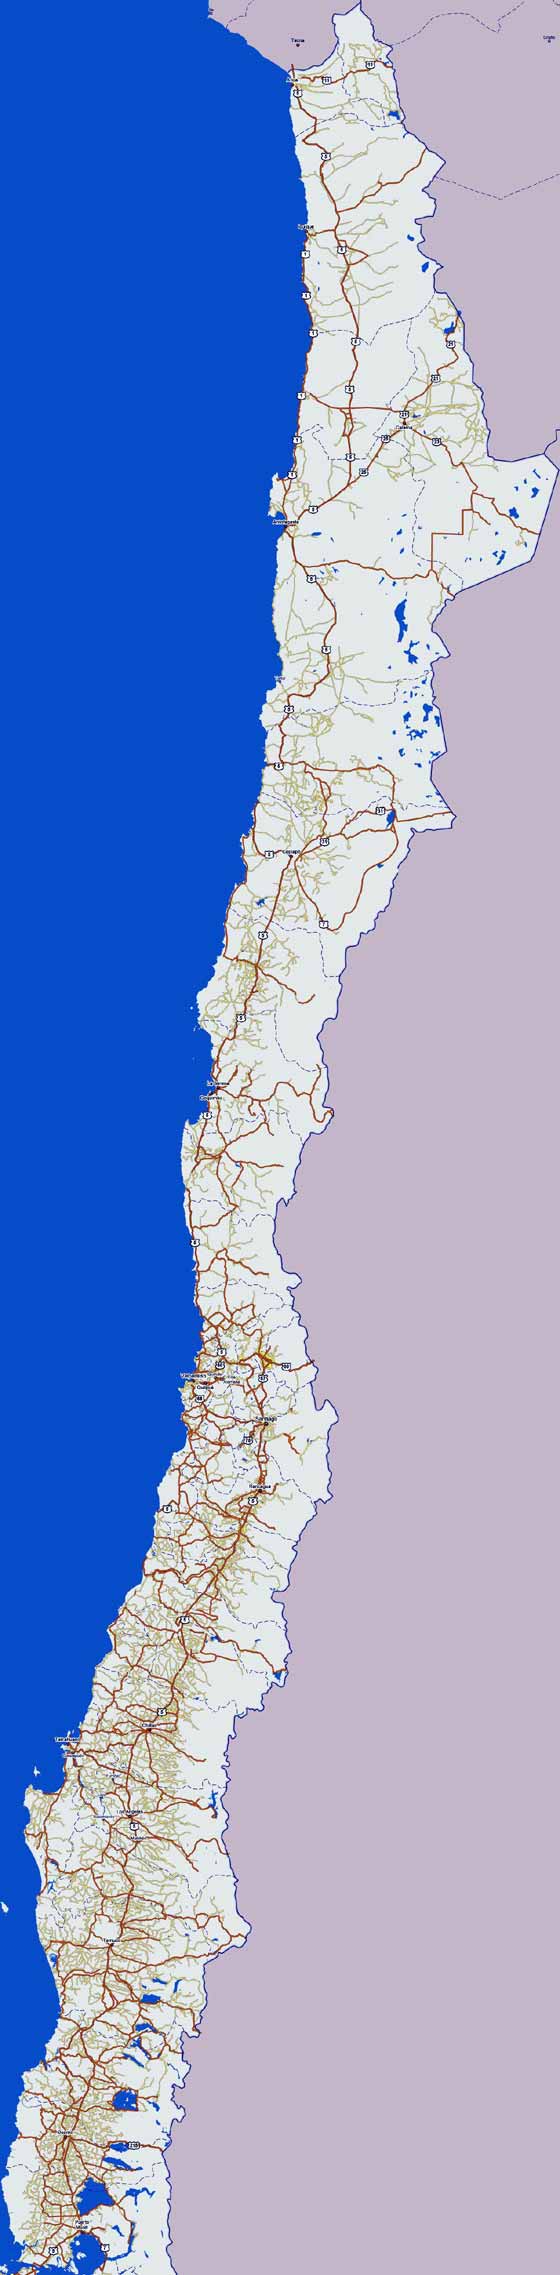 Large map of Chile